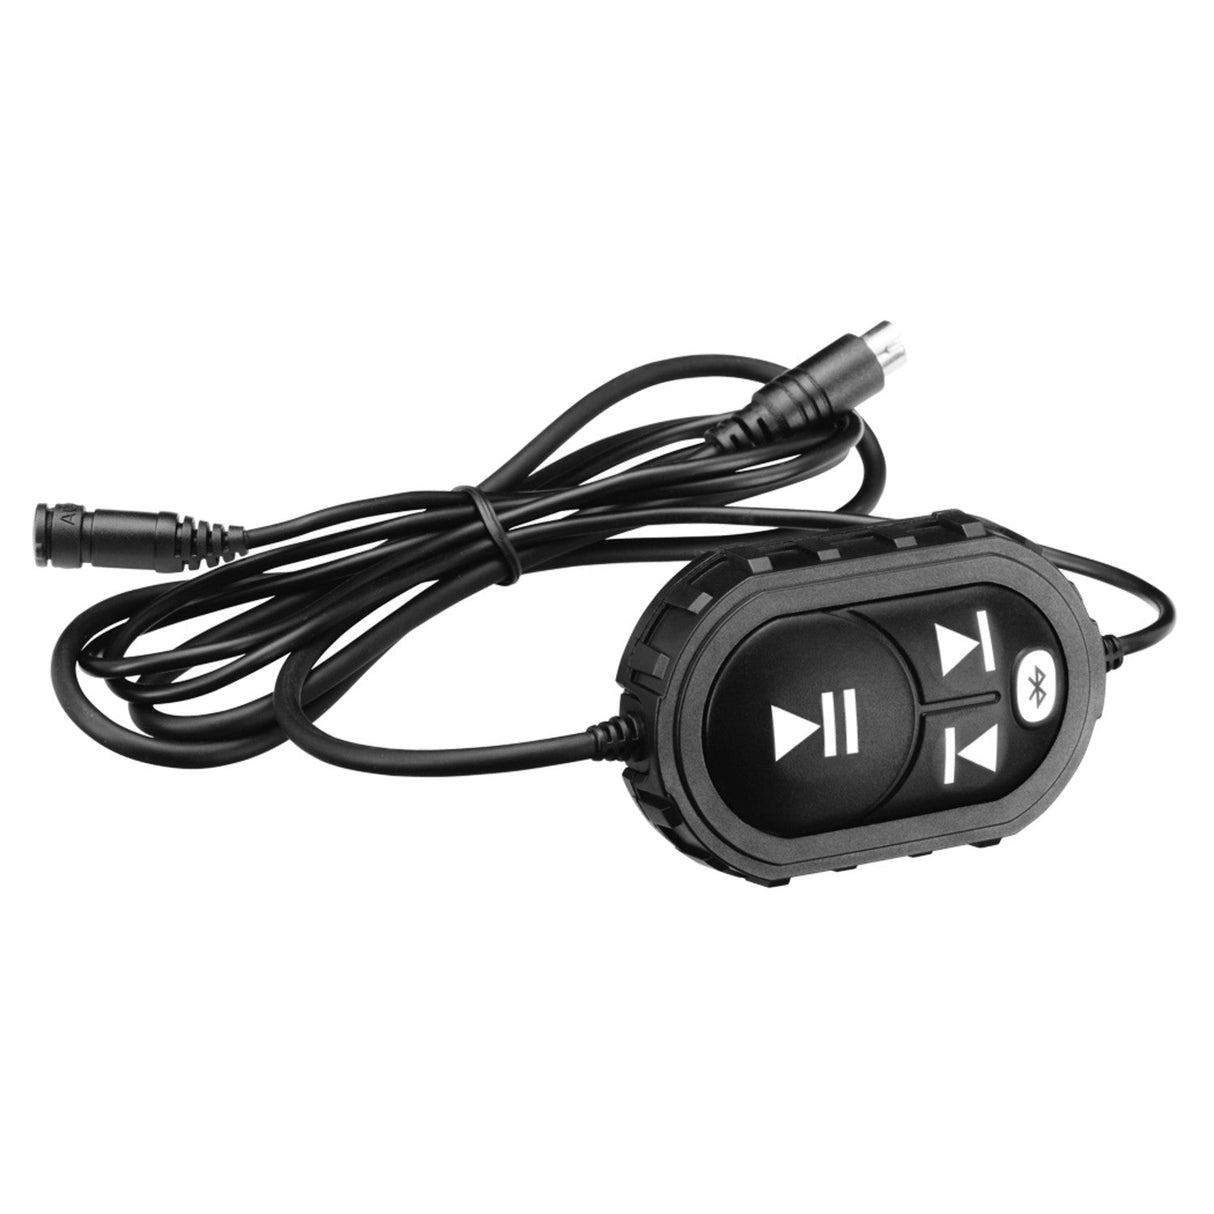 Boss Audio Powersports Plug and Play Audio System with Weatherproof 6.5